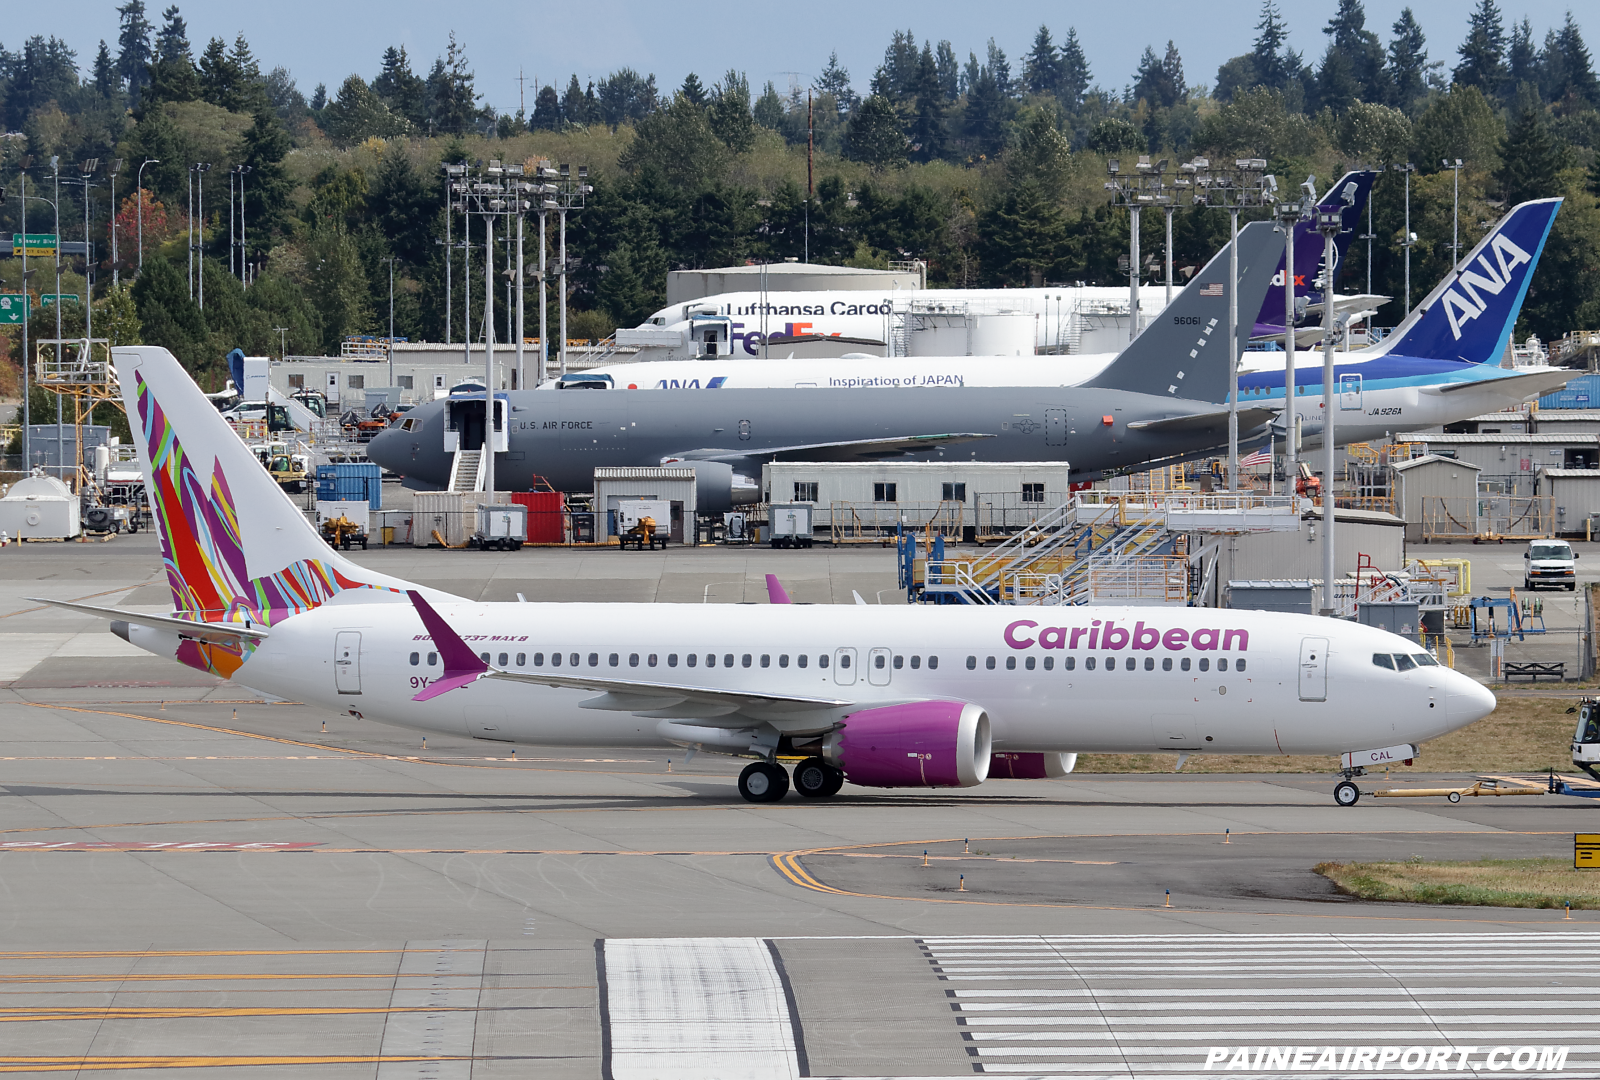 Caribbean Airlines 737 9Y-CAL at KPAE Paine Field